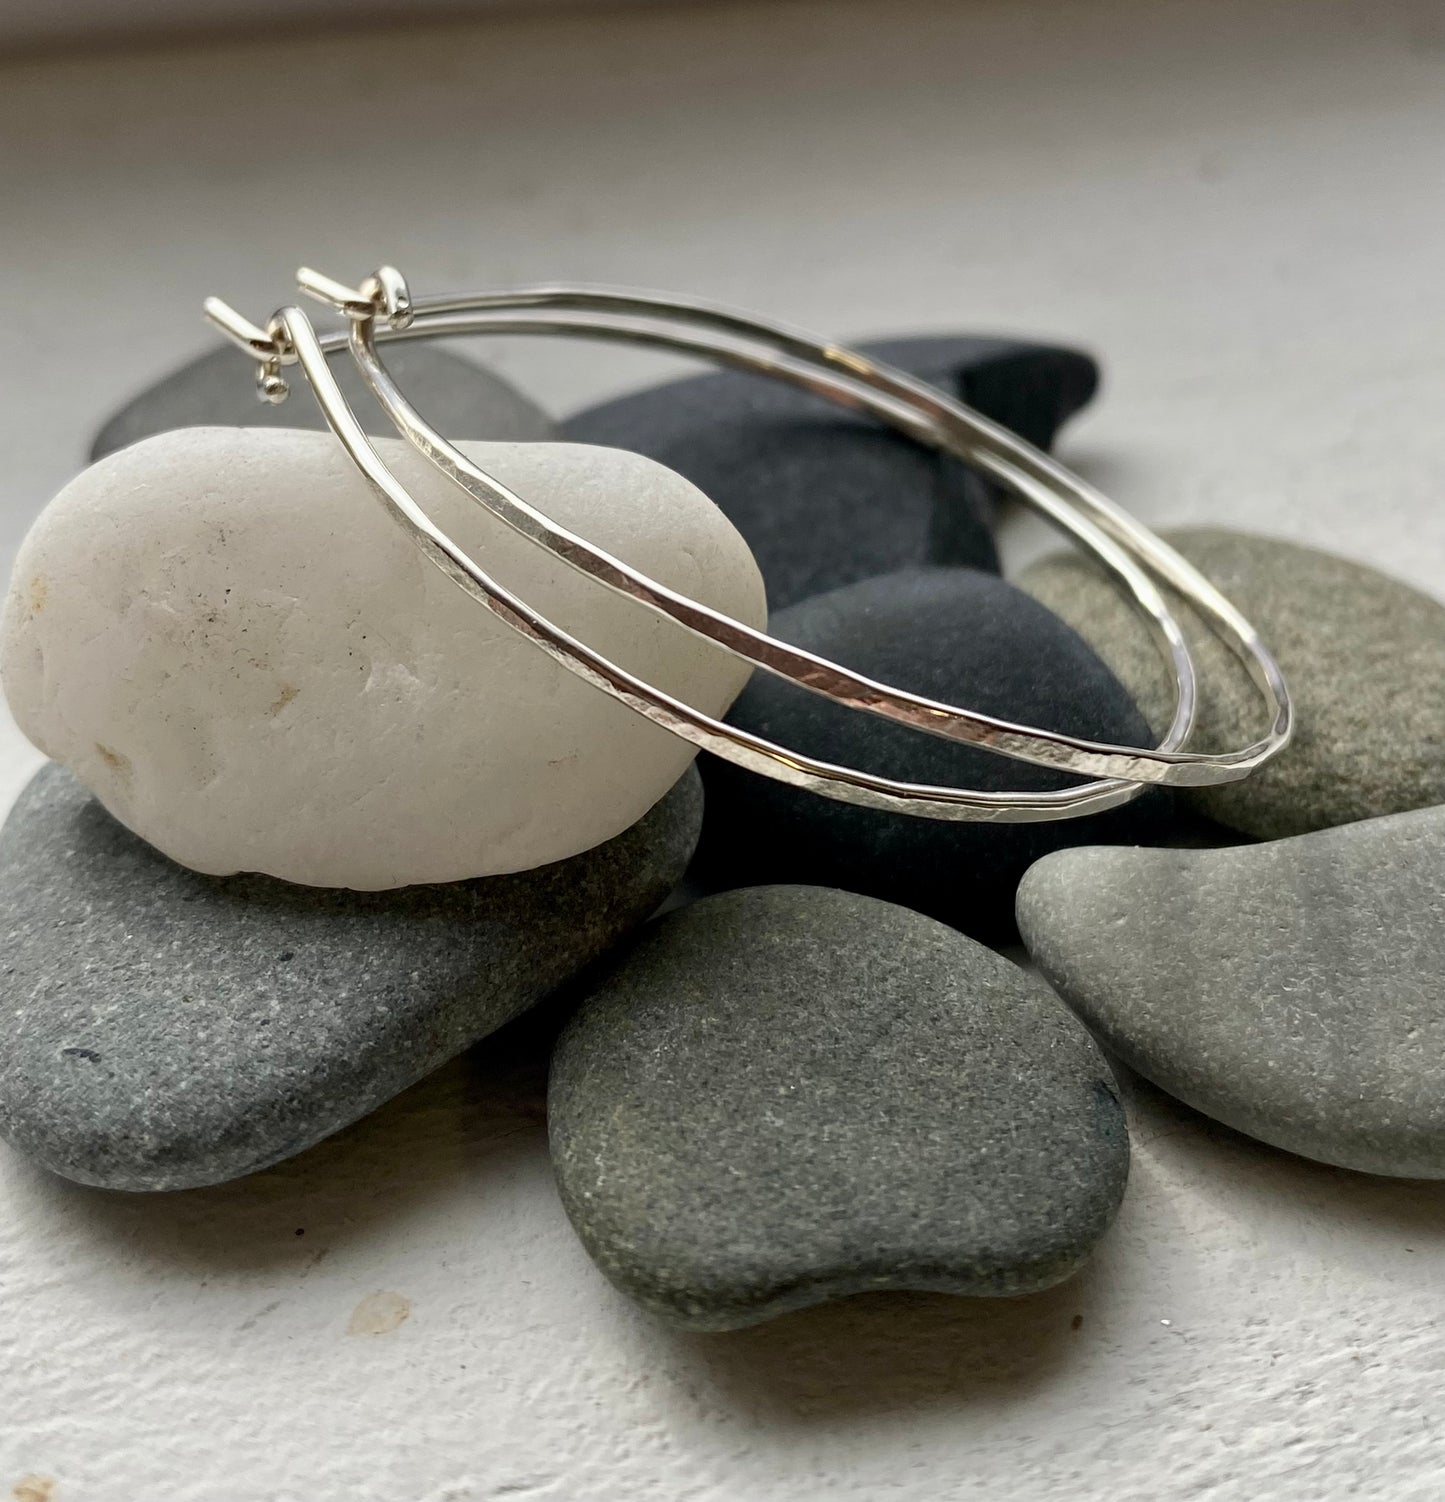 Large Hoop Earrings in Sterling Silver or Gold Fill *Live your life collection